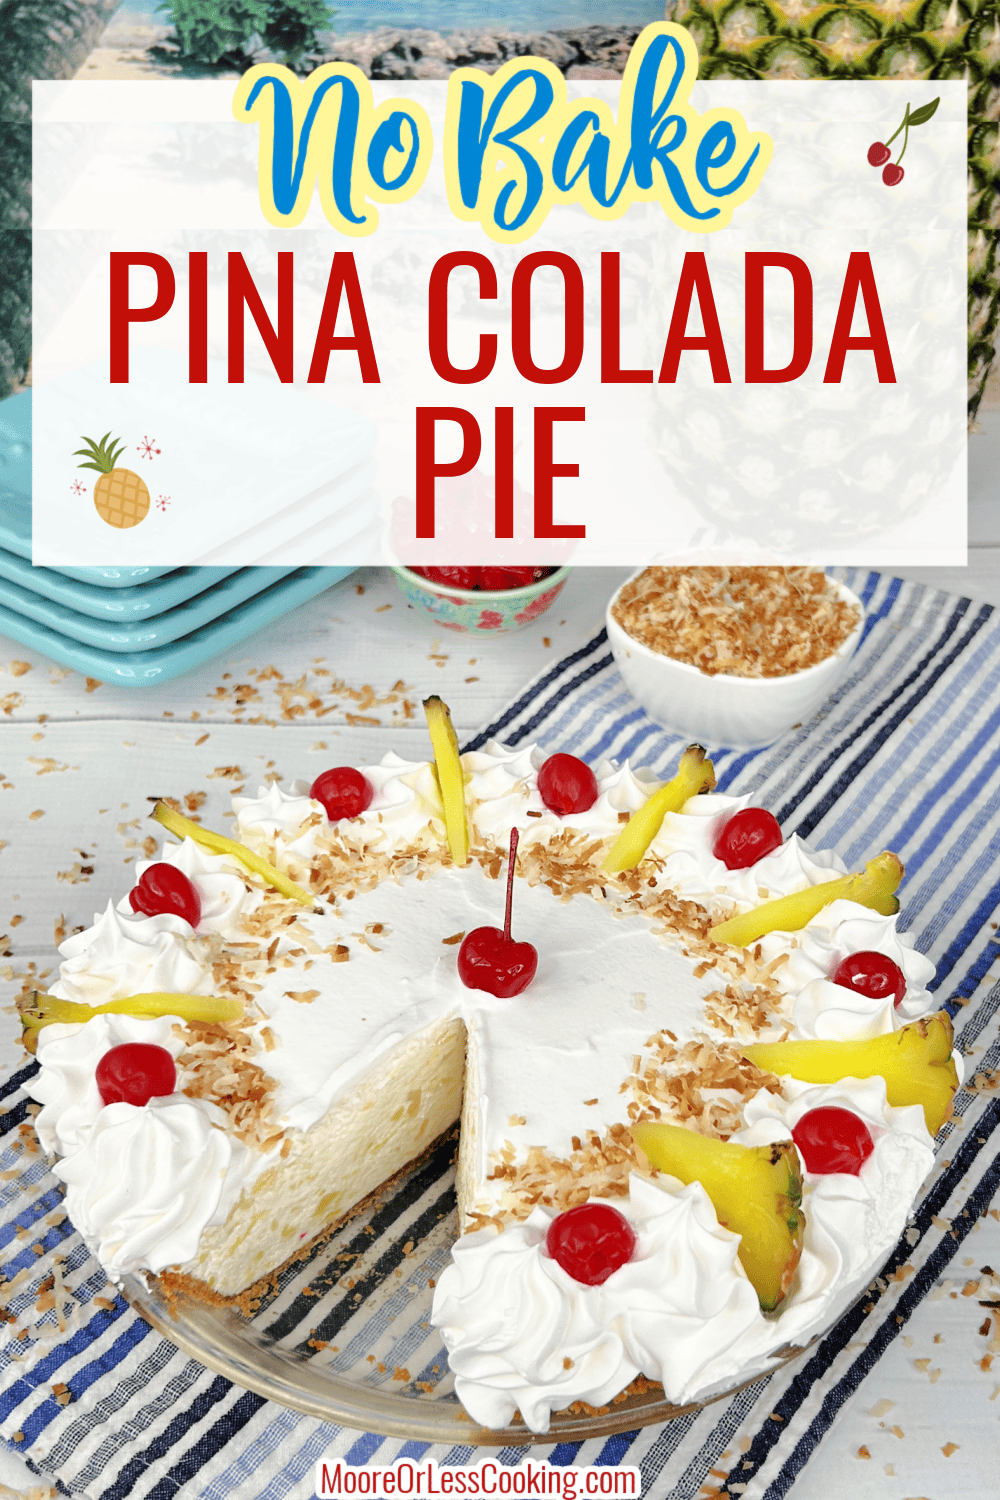 This light, airy and tropical flavored No Bake Pina Colada Pie is the perfect chilled dessert for celebrating summer. The buttery graham cracker crust holds the creamy pineapple, coconut, and rum-flavored filling that's garnished with whipped cream and maraschino cherries. Serve this easy dreamy dessert to rave reviews! via @Mooreorlesscook